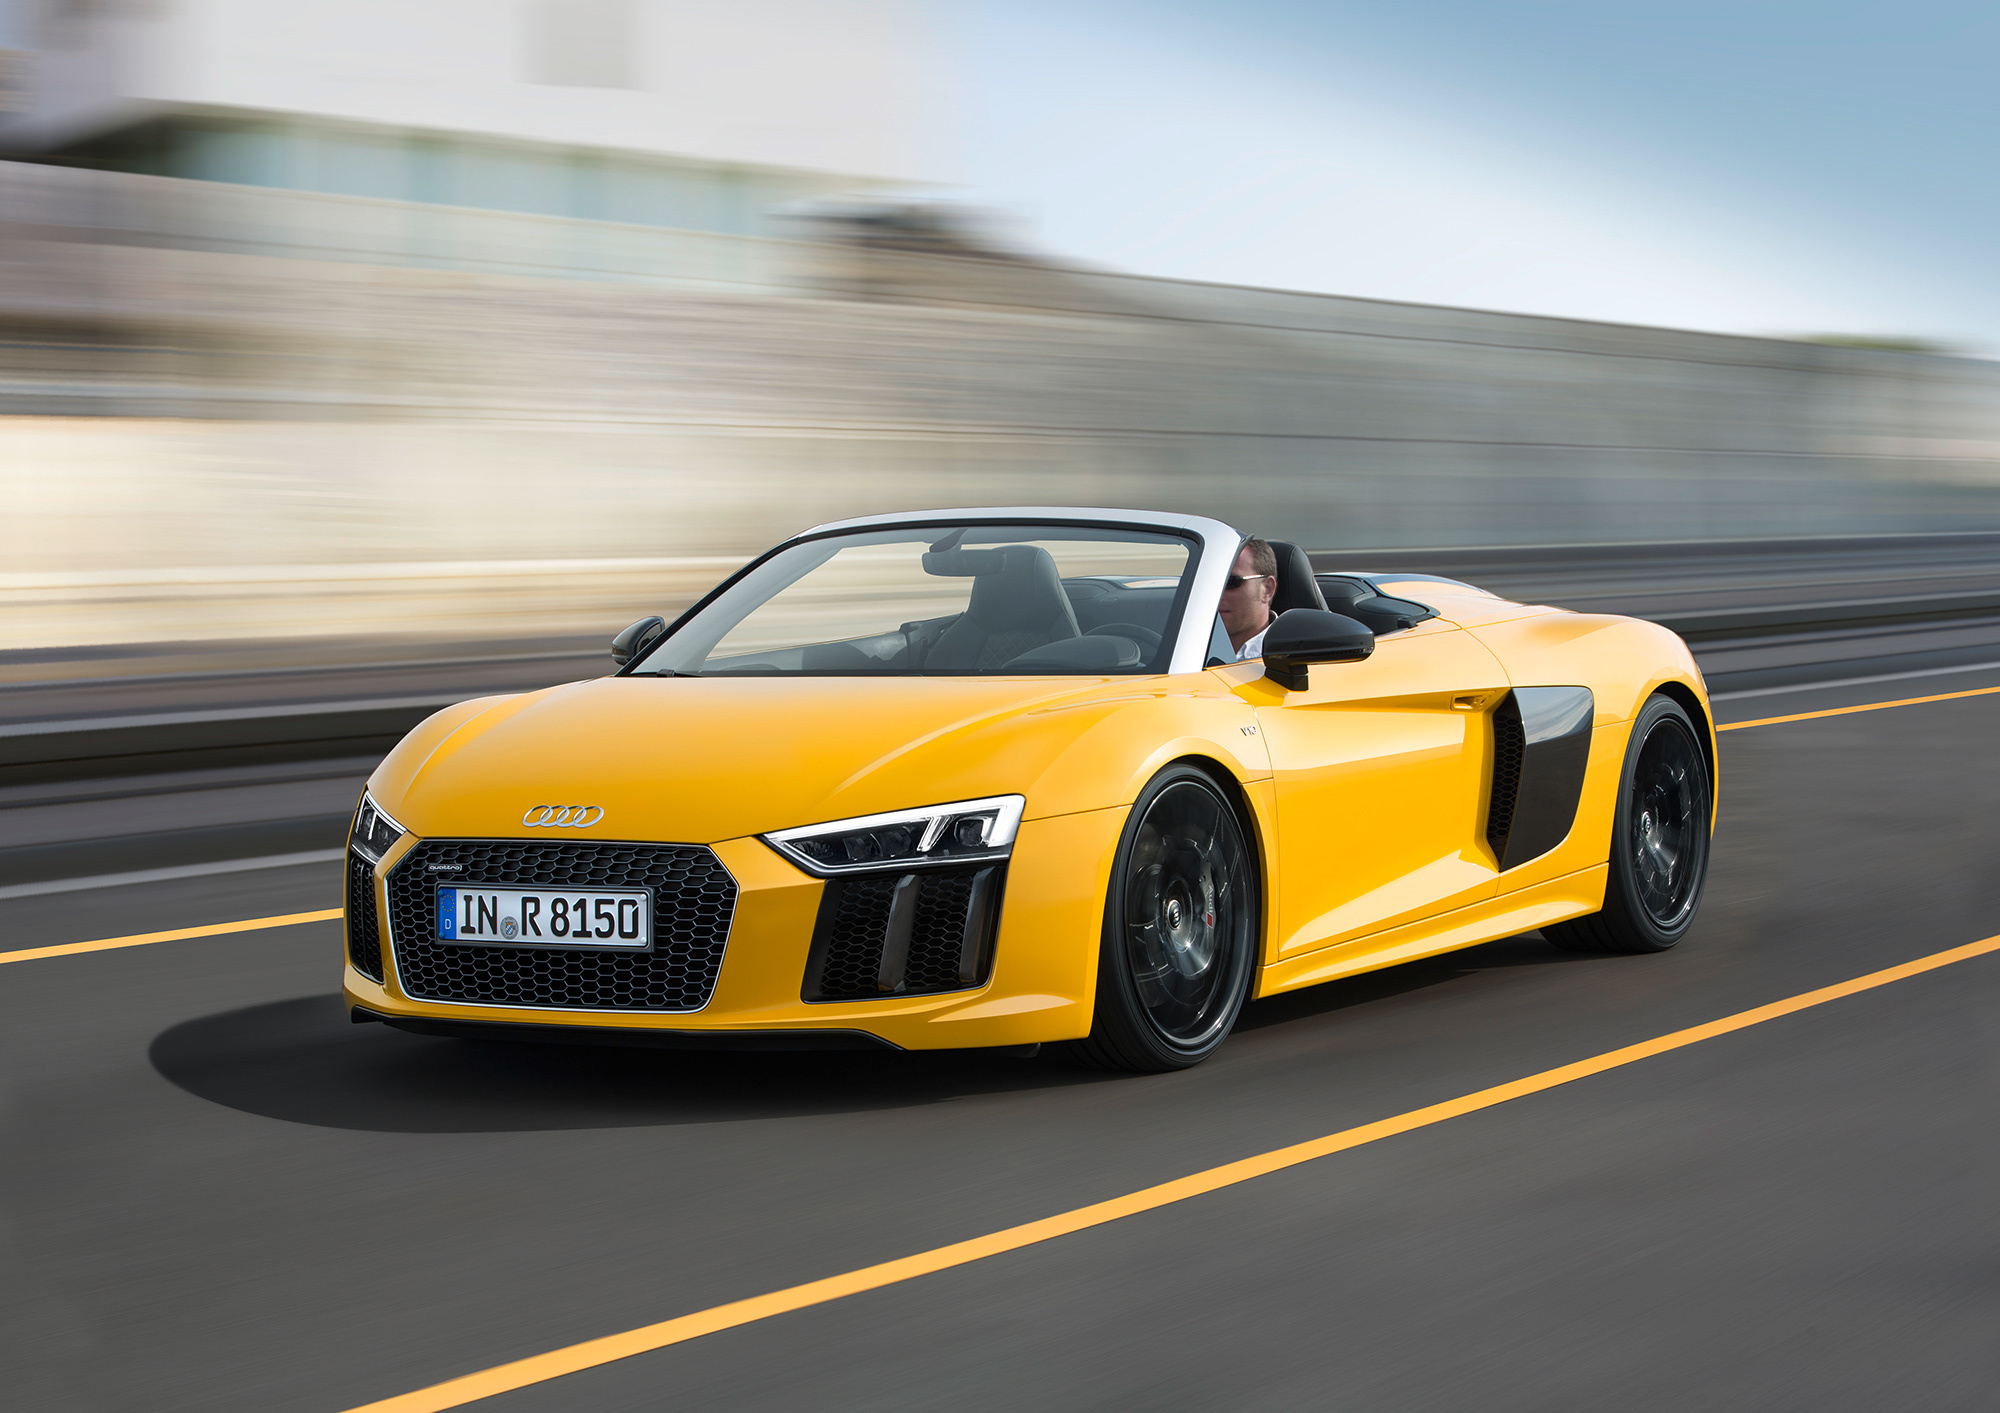 Audi R8 Spyder Image Photos Pictures Background